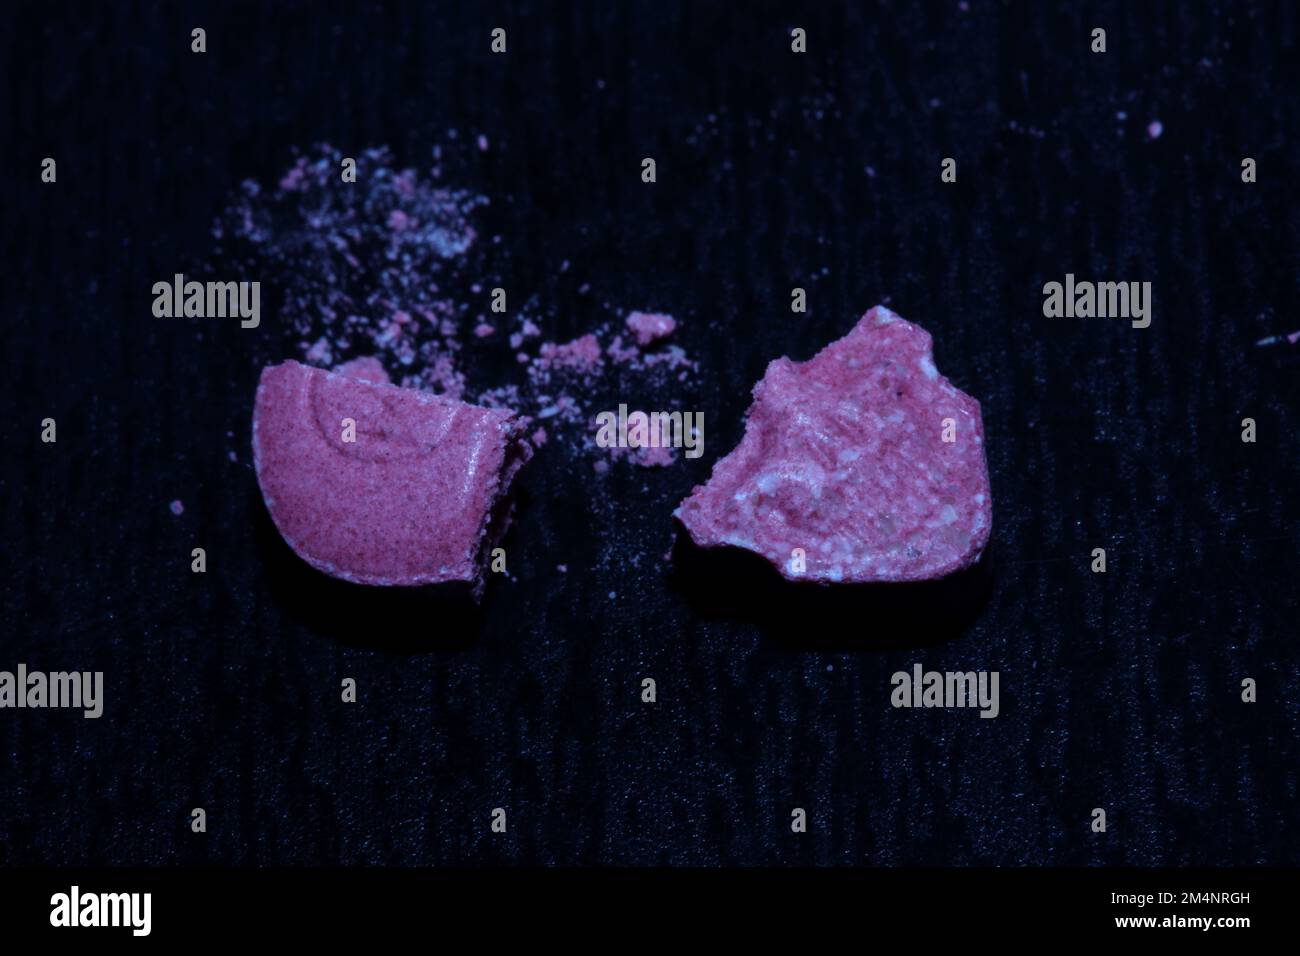 Pink skull ecstasy pill close up background high quality prints purple army dope narcotics substance high dose psychedelic way of life Stock Photo